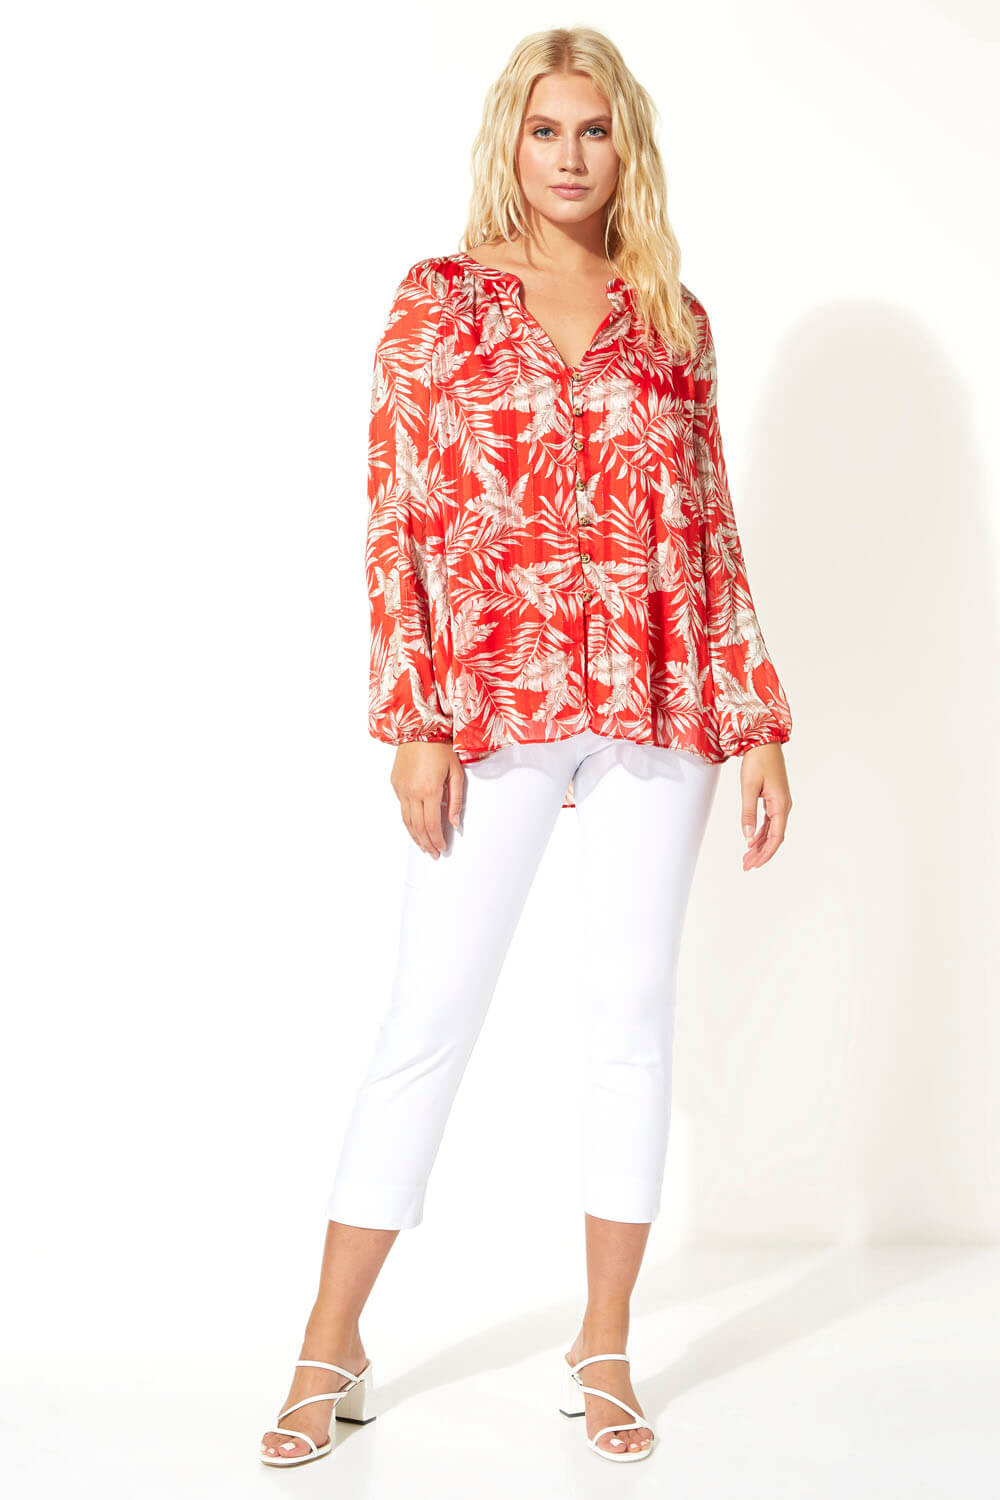 Red Floral Print Sparkle Detail Blouse, Image 2 of 5